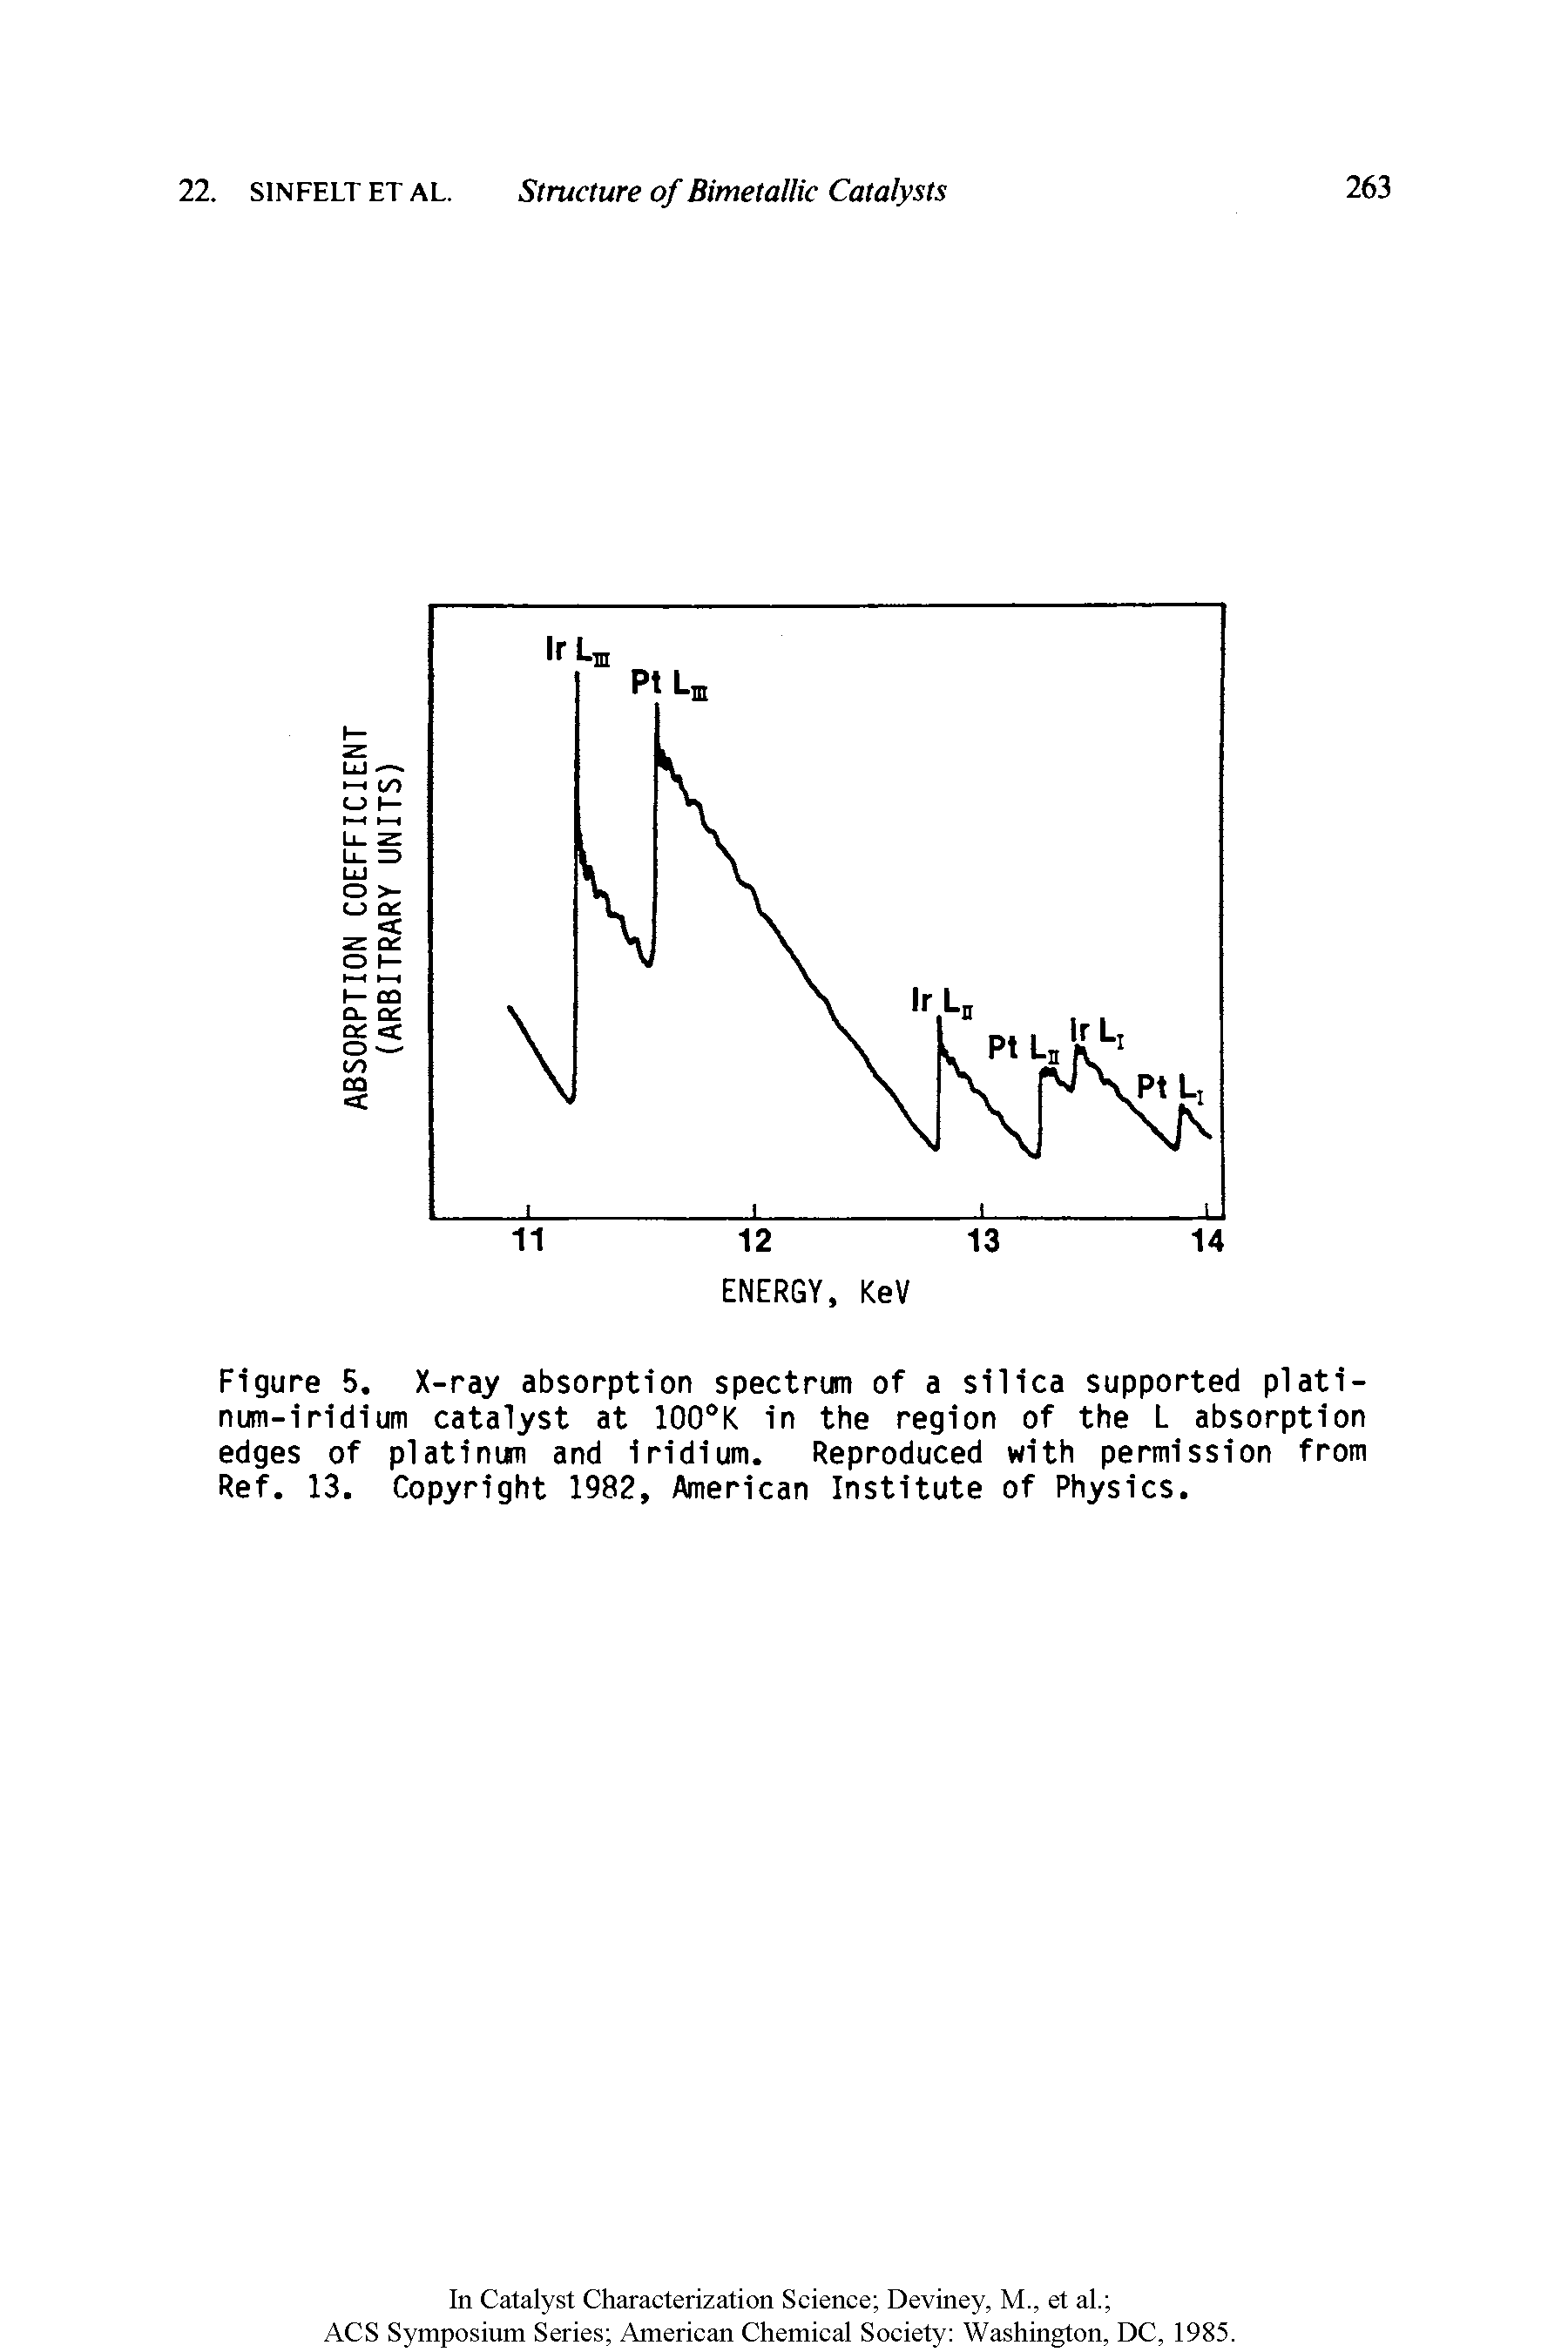 Figure 5. X-ray absorption spectrum of a silica supported platinum-iridium catalyst at 100 K in the region of the L absorption edges of platinum and iridium. Reproduced with permission from Ref. 13. Copyright 1982, American Institute of Physics.